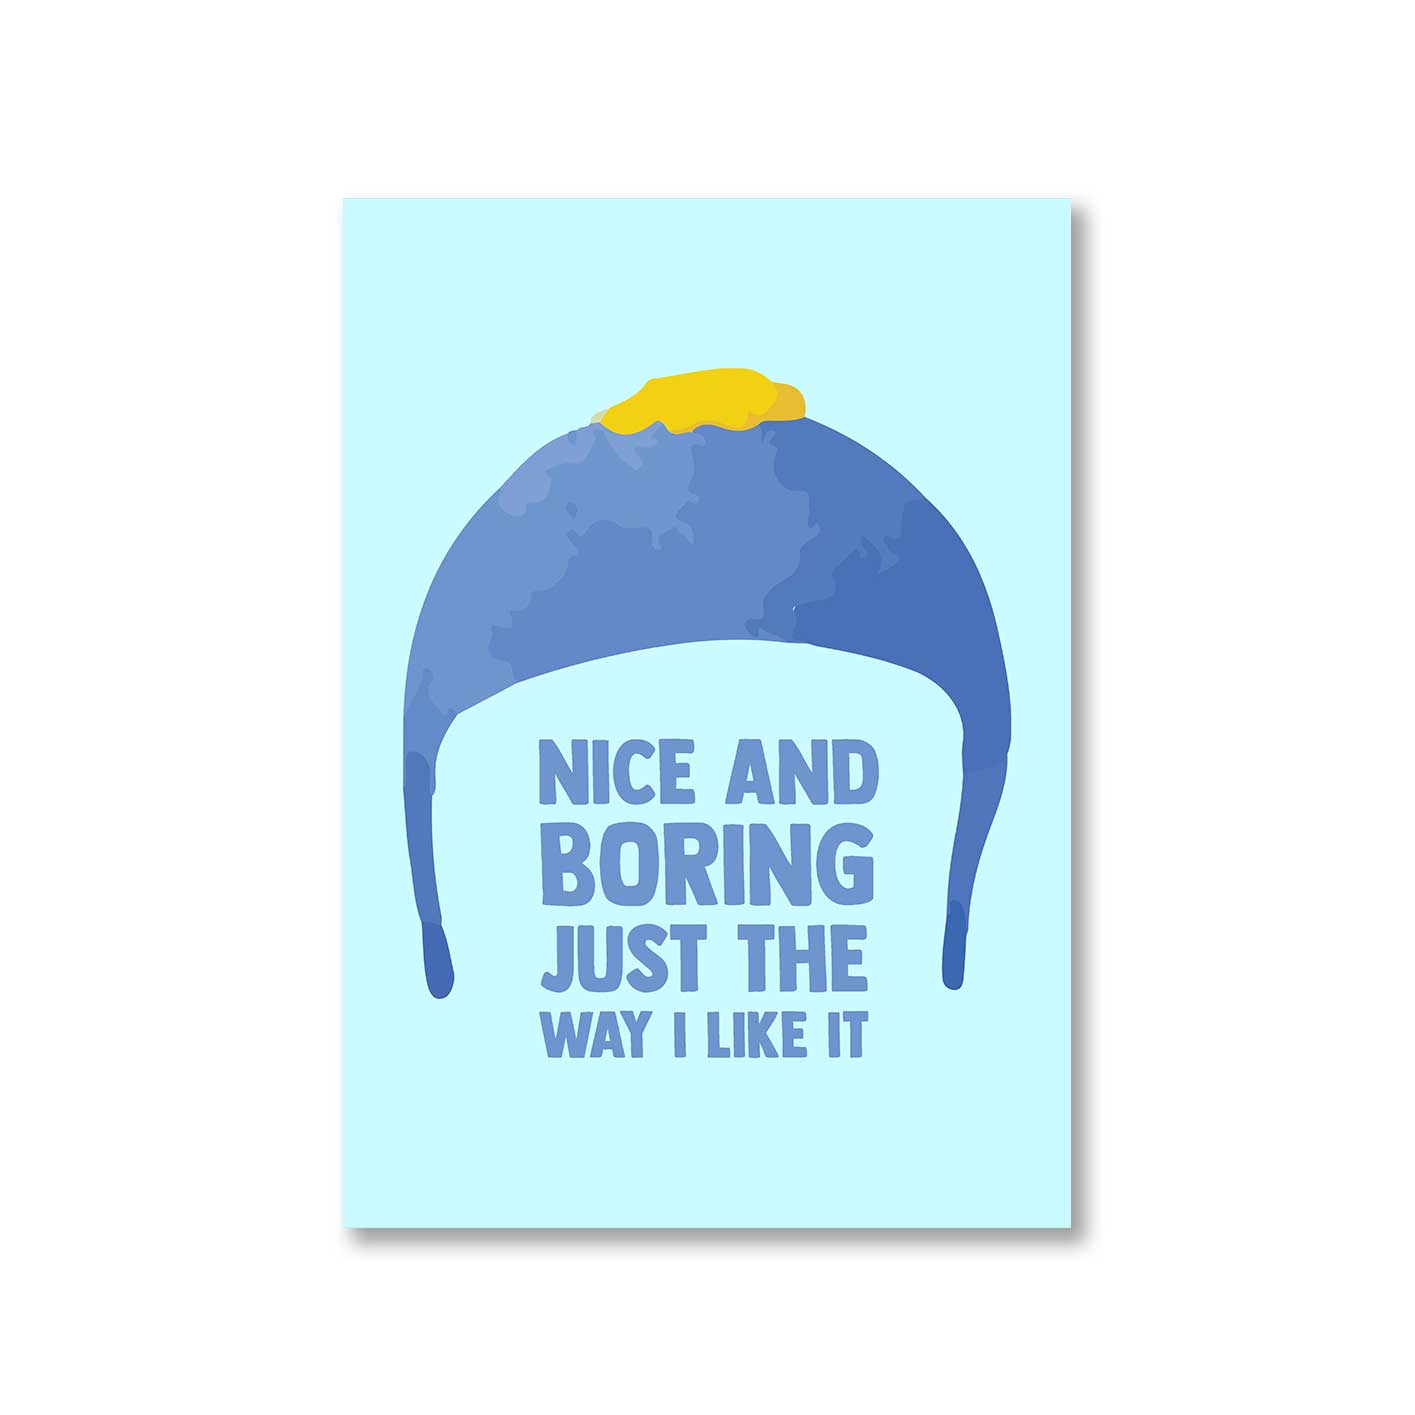 south park nice & boring poster wall art buy online united states of america usa the banyan tee tbt a4 south park kenny cartman stan kyle cartoon character illustration